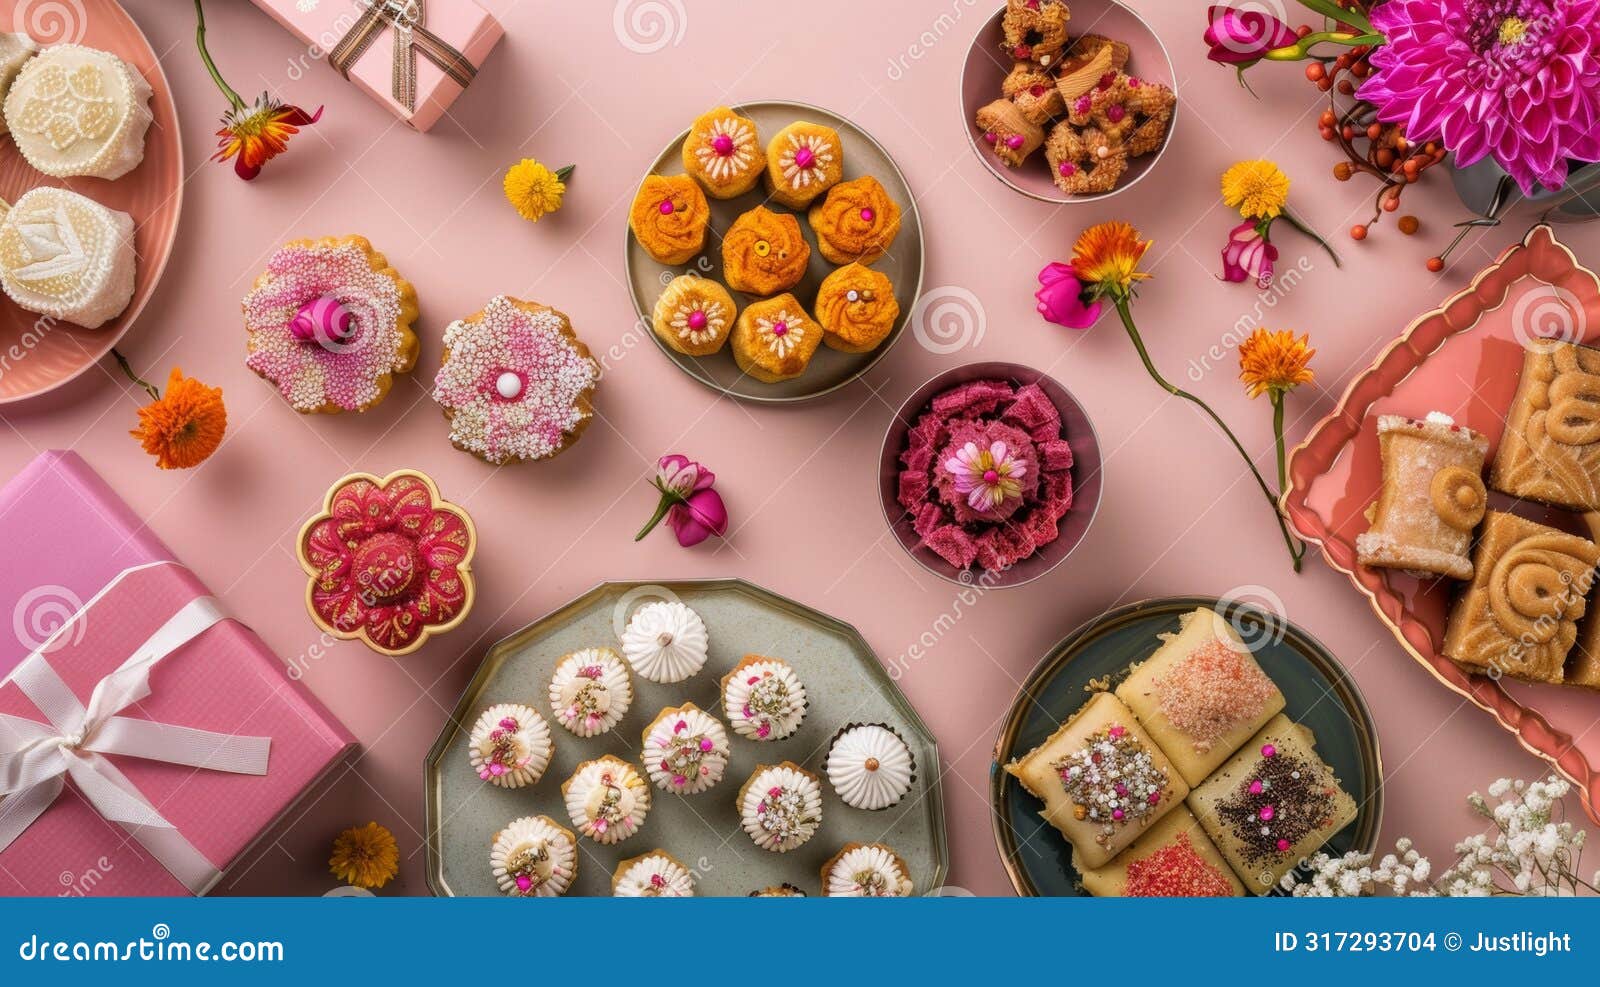 another important aspect of diwali is the exchange of gifts a loved ones. from traditional sweets to ornate diyas the